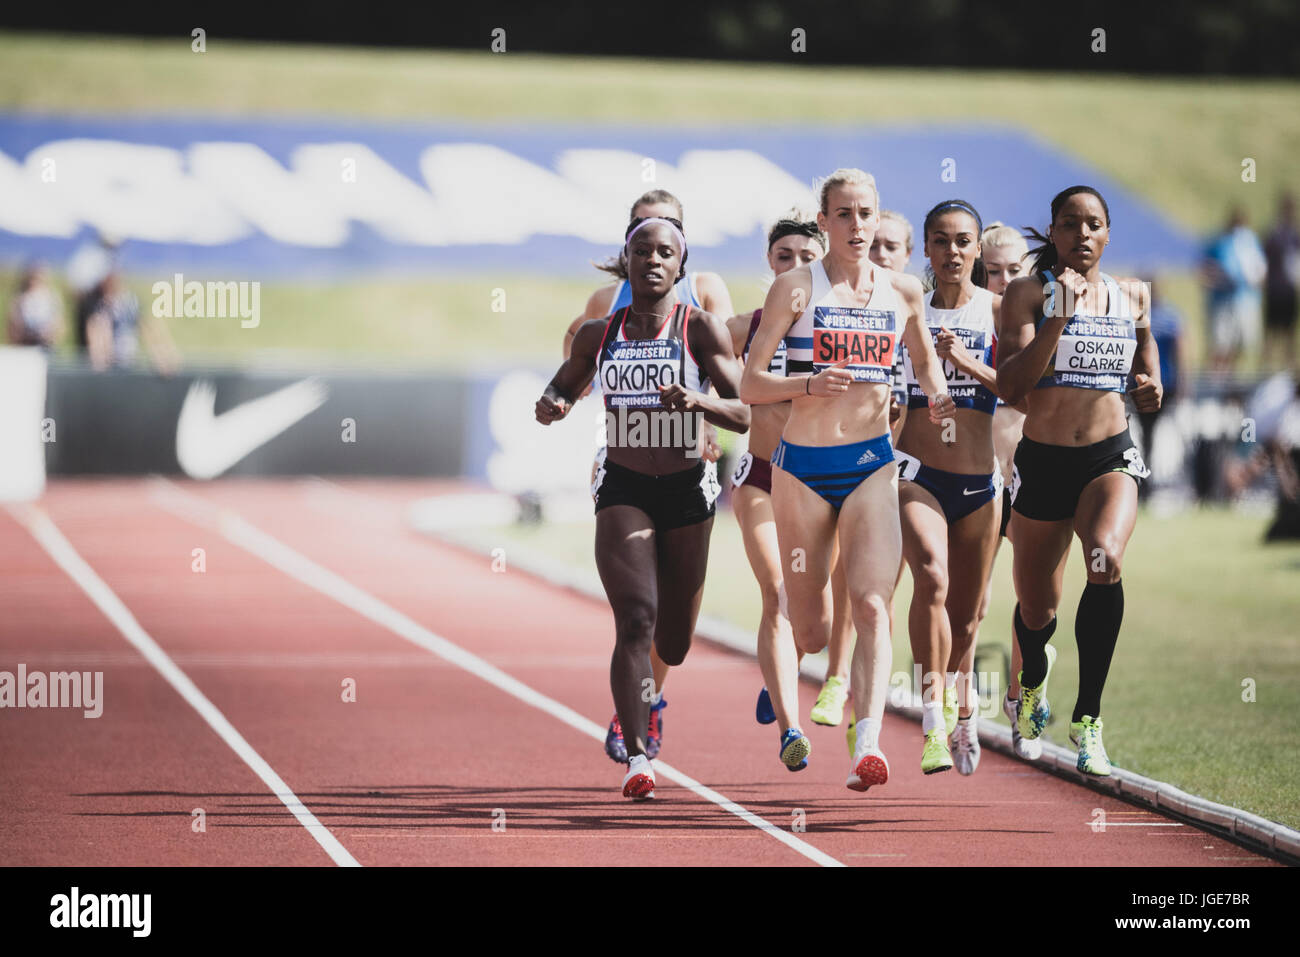 The whole field is pictured off the ground during the women's 800m final at the British Athletics Championships in Birmingham, UK on 2 July 2017. Stock Photo